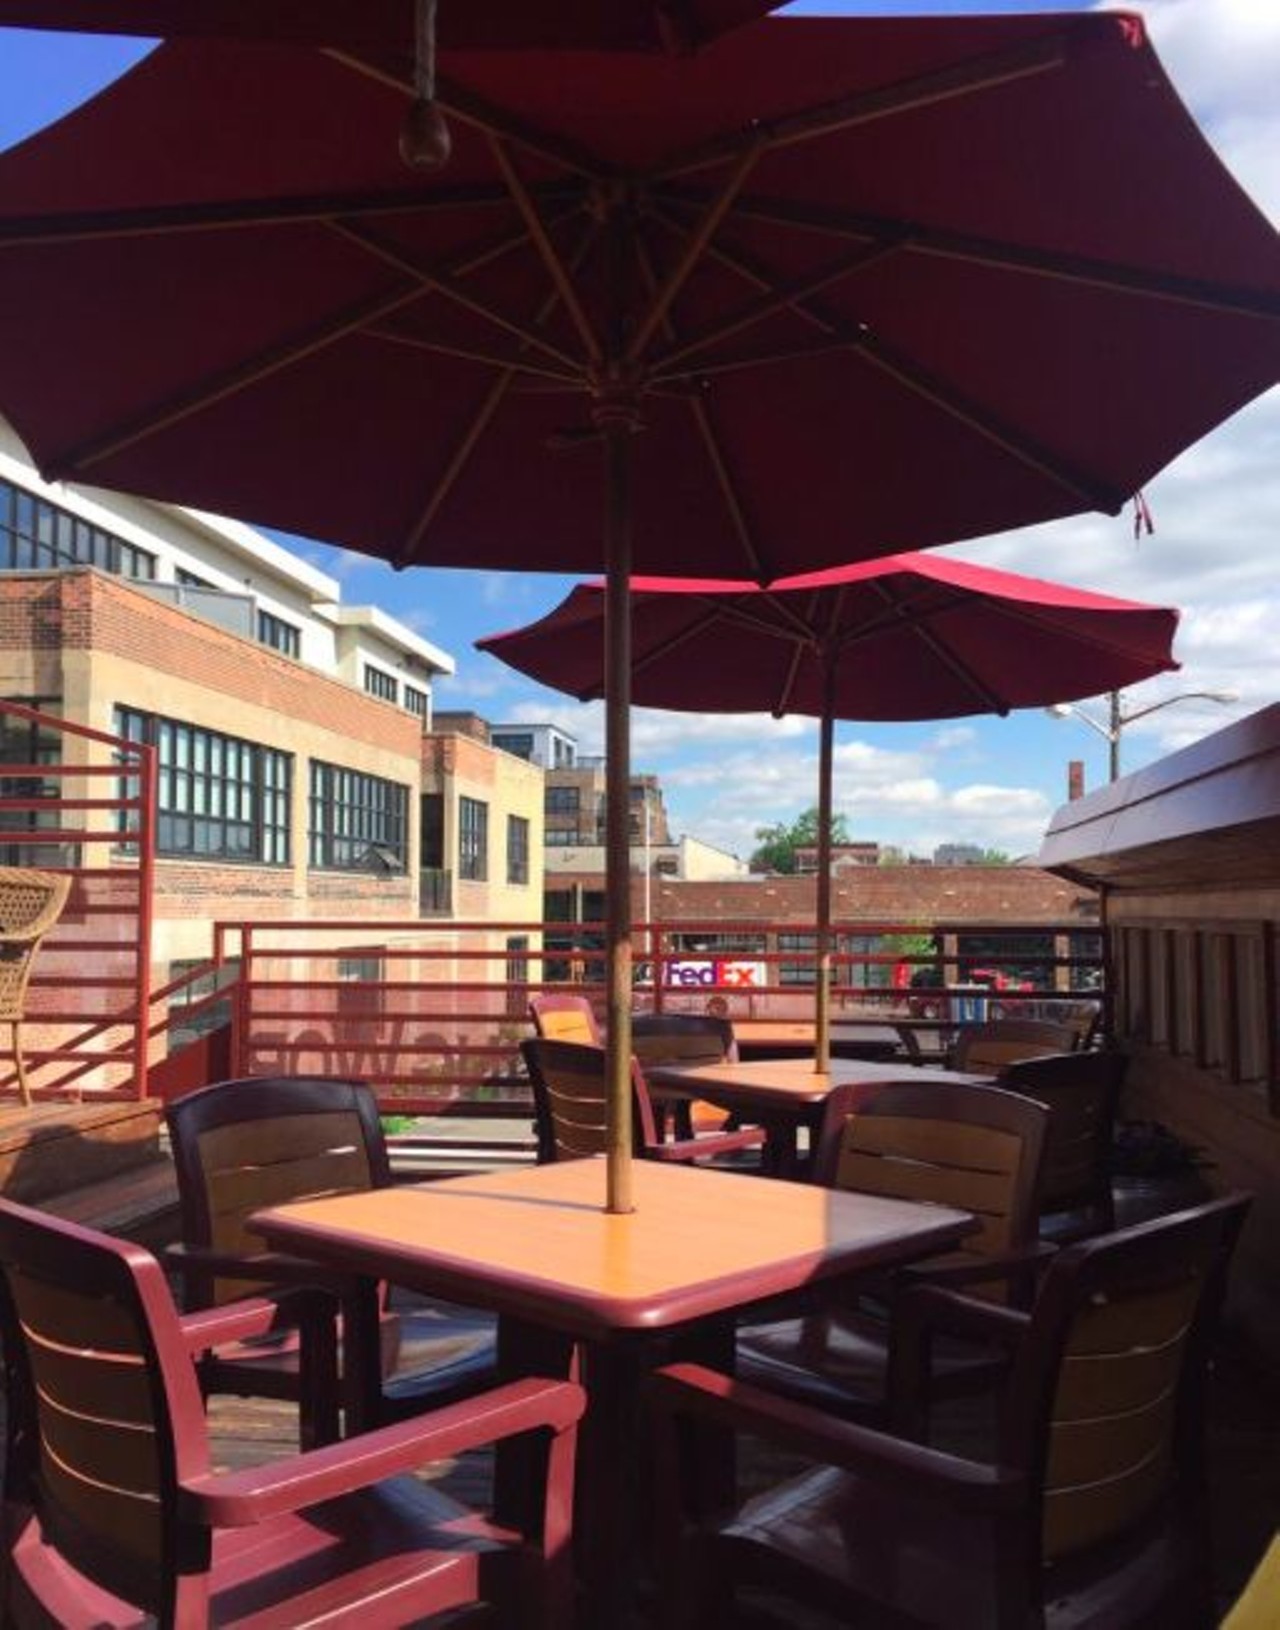 Motor City Brewing Works
470 Canfield St., Detroit
Motor City Brewing Works has a rooftop deck that is sure to amaze. Here, you are able to sit back and relax while enjoying a fresh brew and spectacular view of the city. It is also just steps away from Wayne State and other Midtown establishments.
Photo via Yelp user Andrew P.